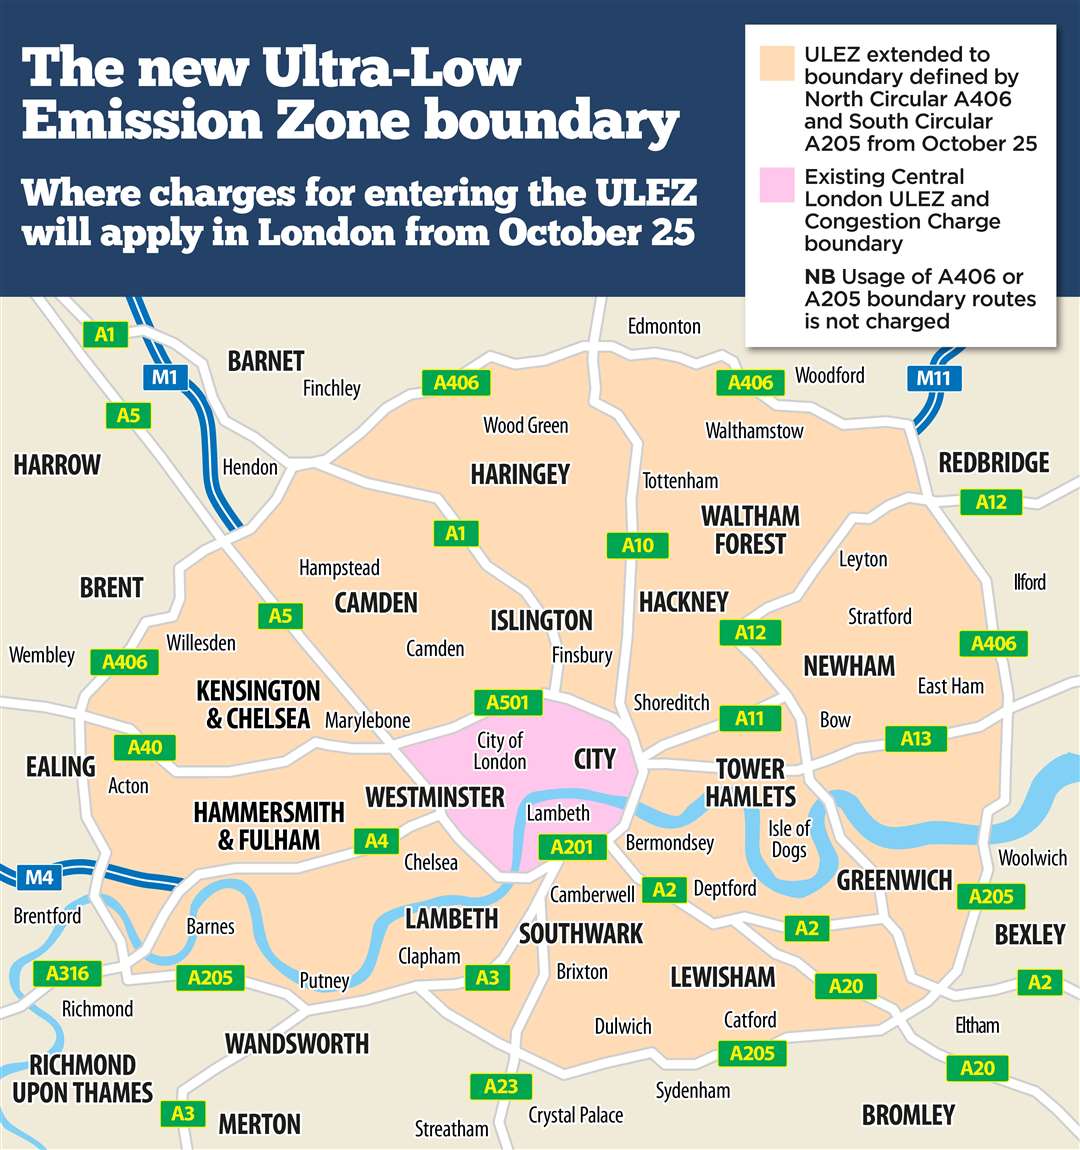 The Ulez, which expanded in October, would be brought out further again to Bromley and Bexley under the proposals